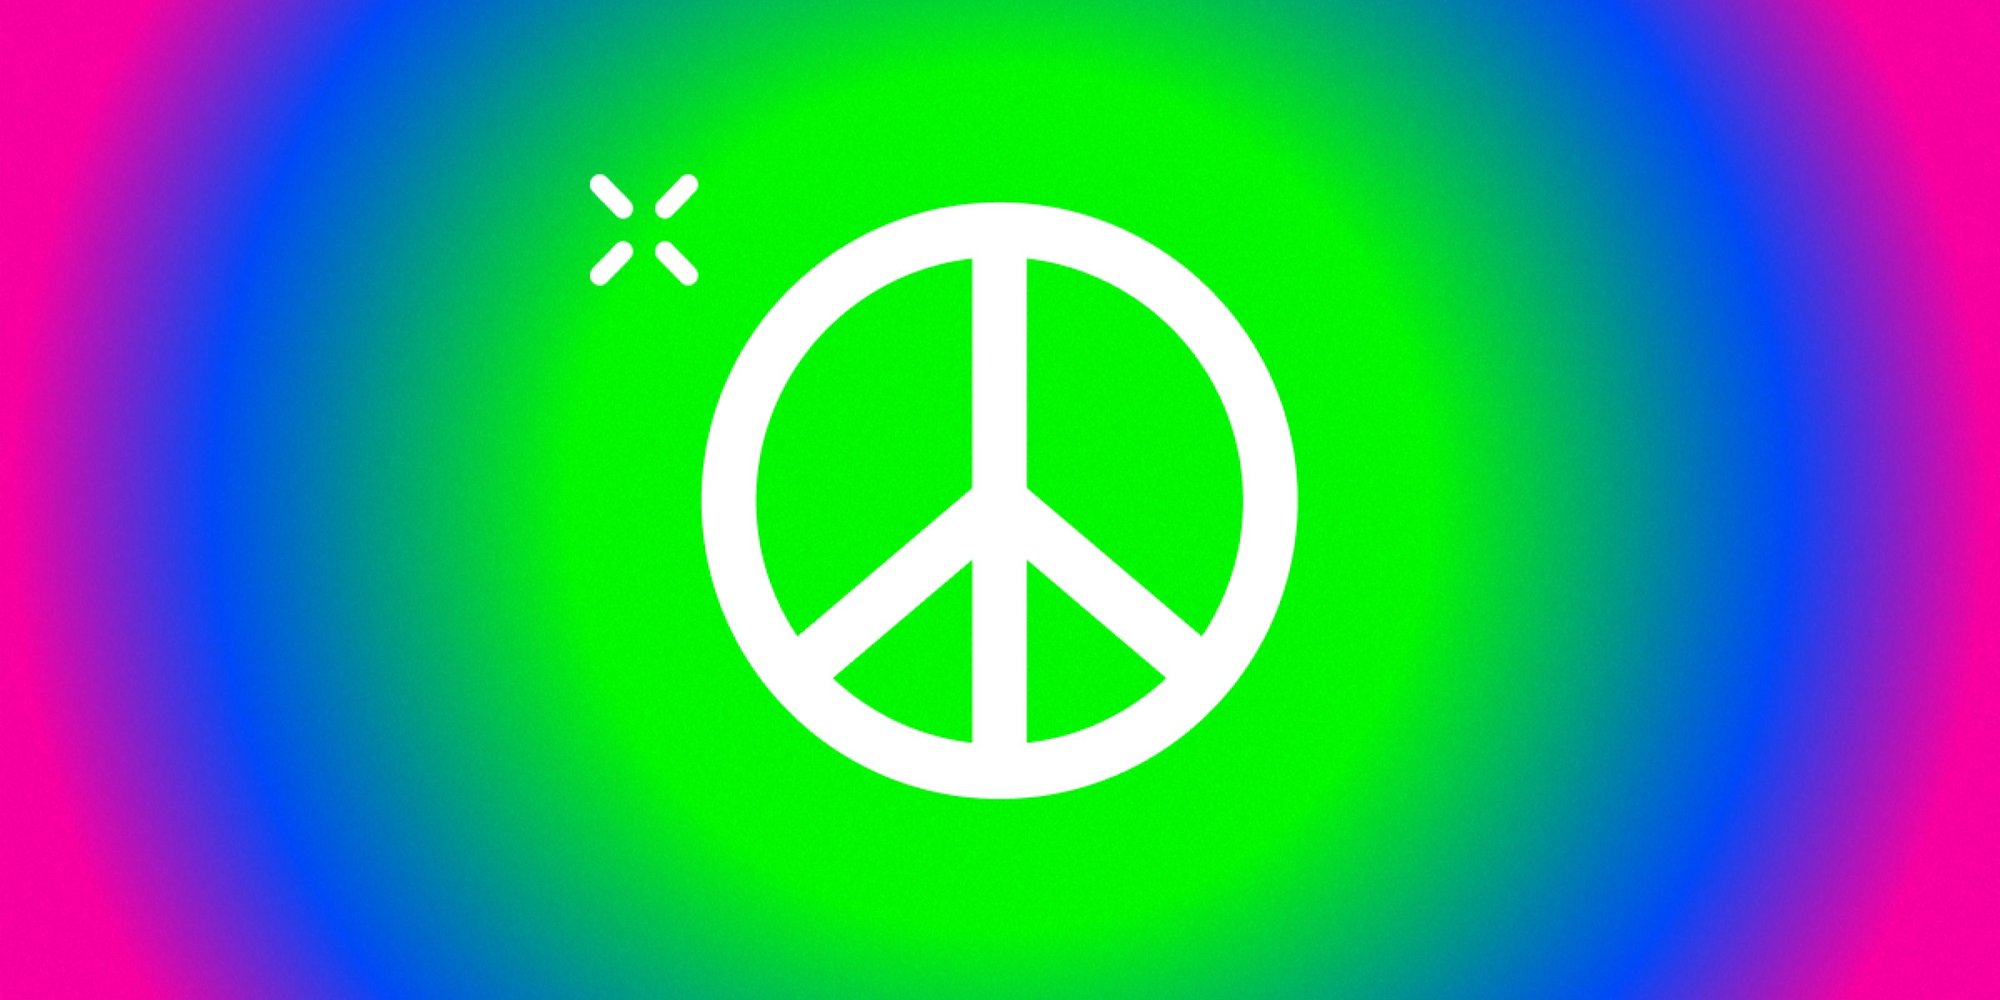 Colorful peace symbol with a PAX symbol